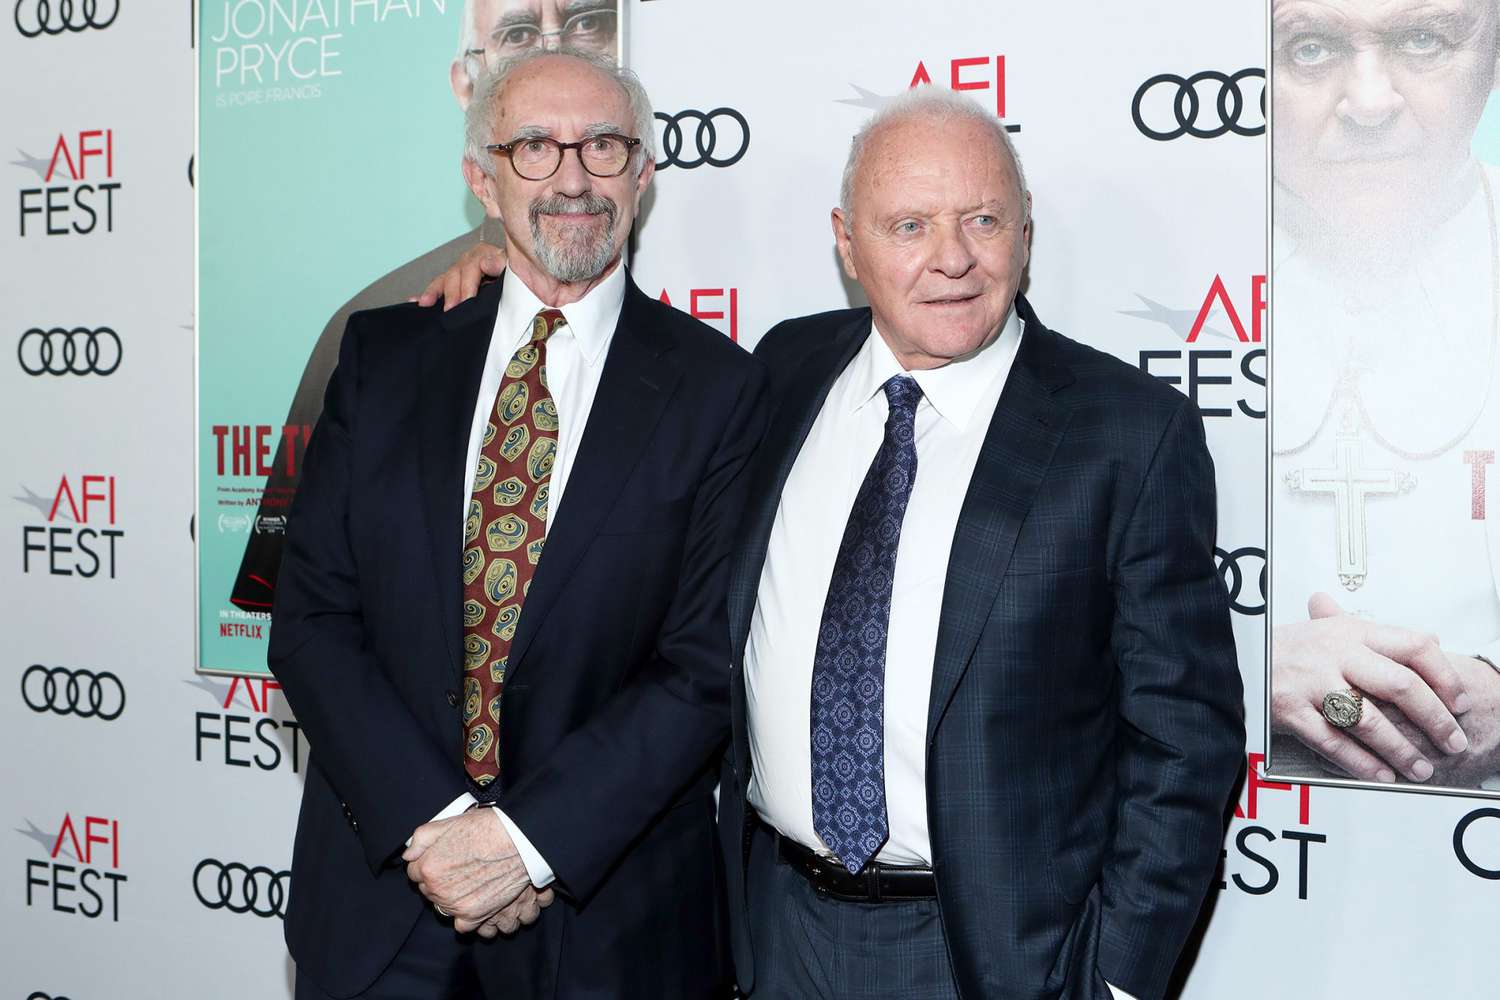 Jonathan Pryce and Anthony Hopkins attend The Two Popes Gala Event at TCL Chinese Theatre on November 18, 2019 in Hollywood, California.